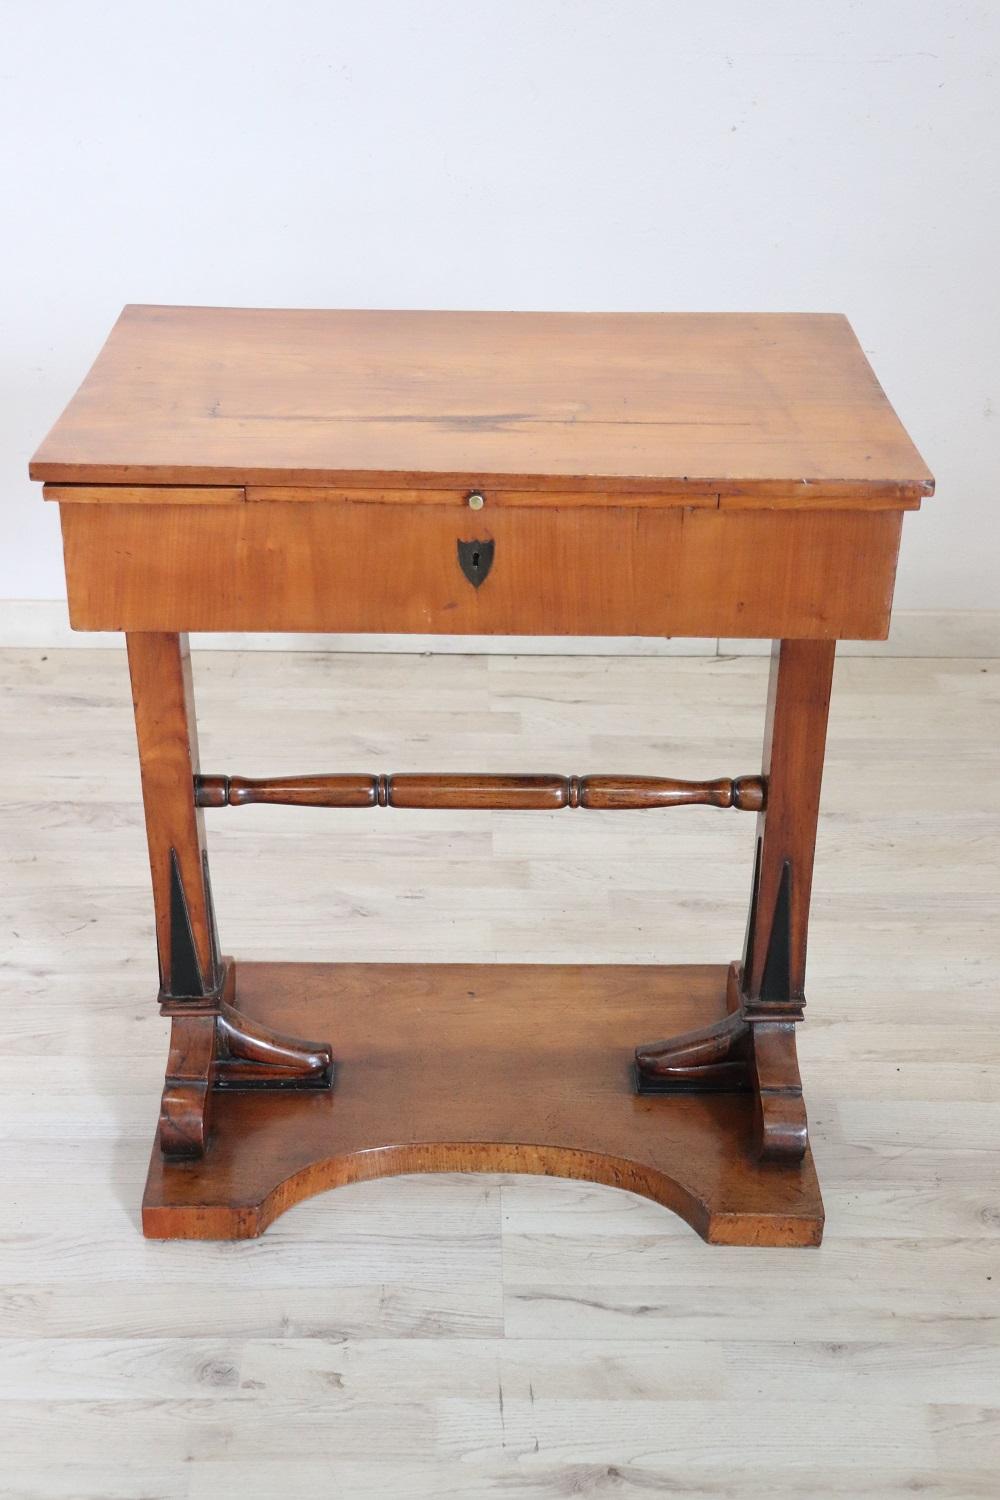 Lovely italian of the period Empire side table in cherry wood. This rare side table turns into a delightful little desk hidden inside the drawer. Internally equipped with numerous small compartments on the sides and under the writing surface. The